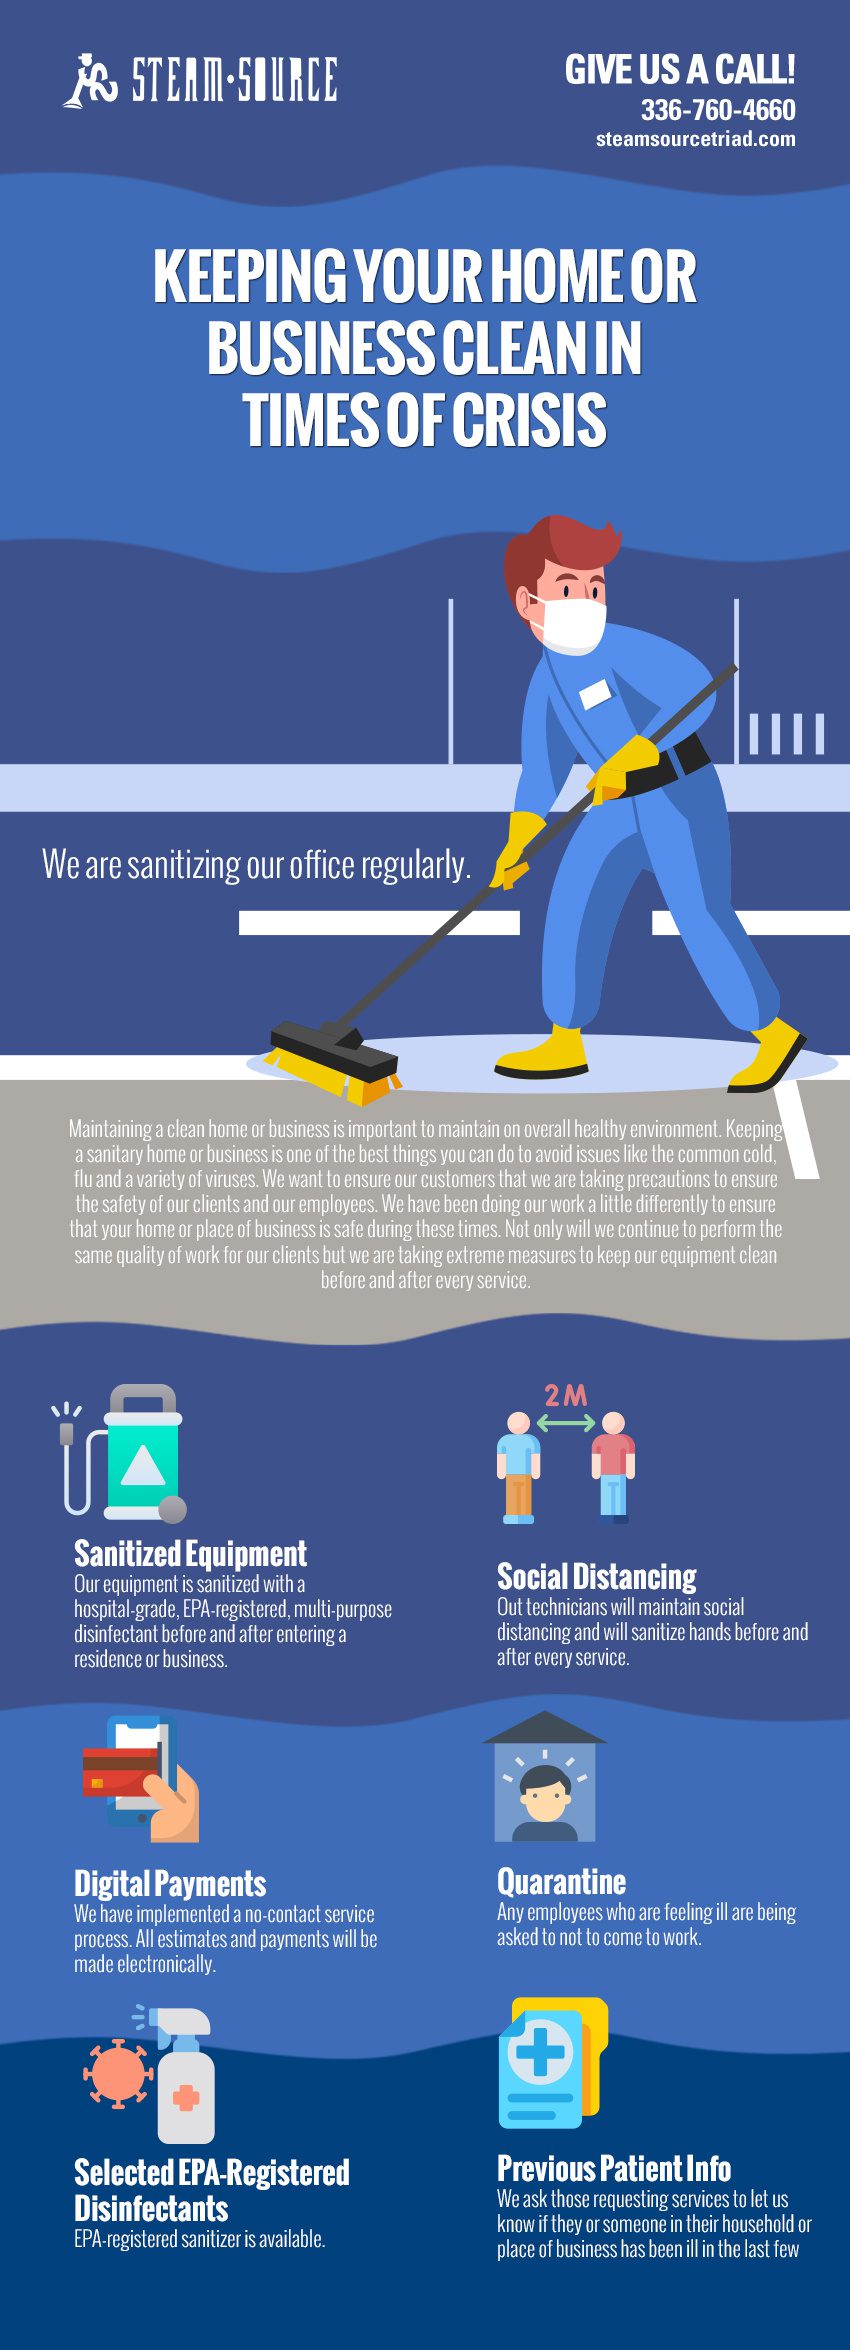 Keeping Your Home or Business Clean in Times of Crisis